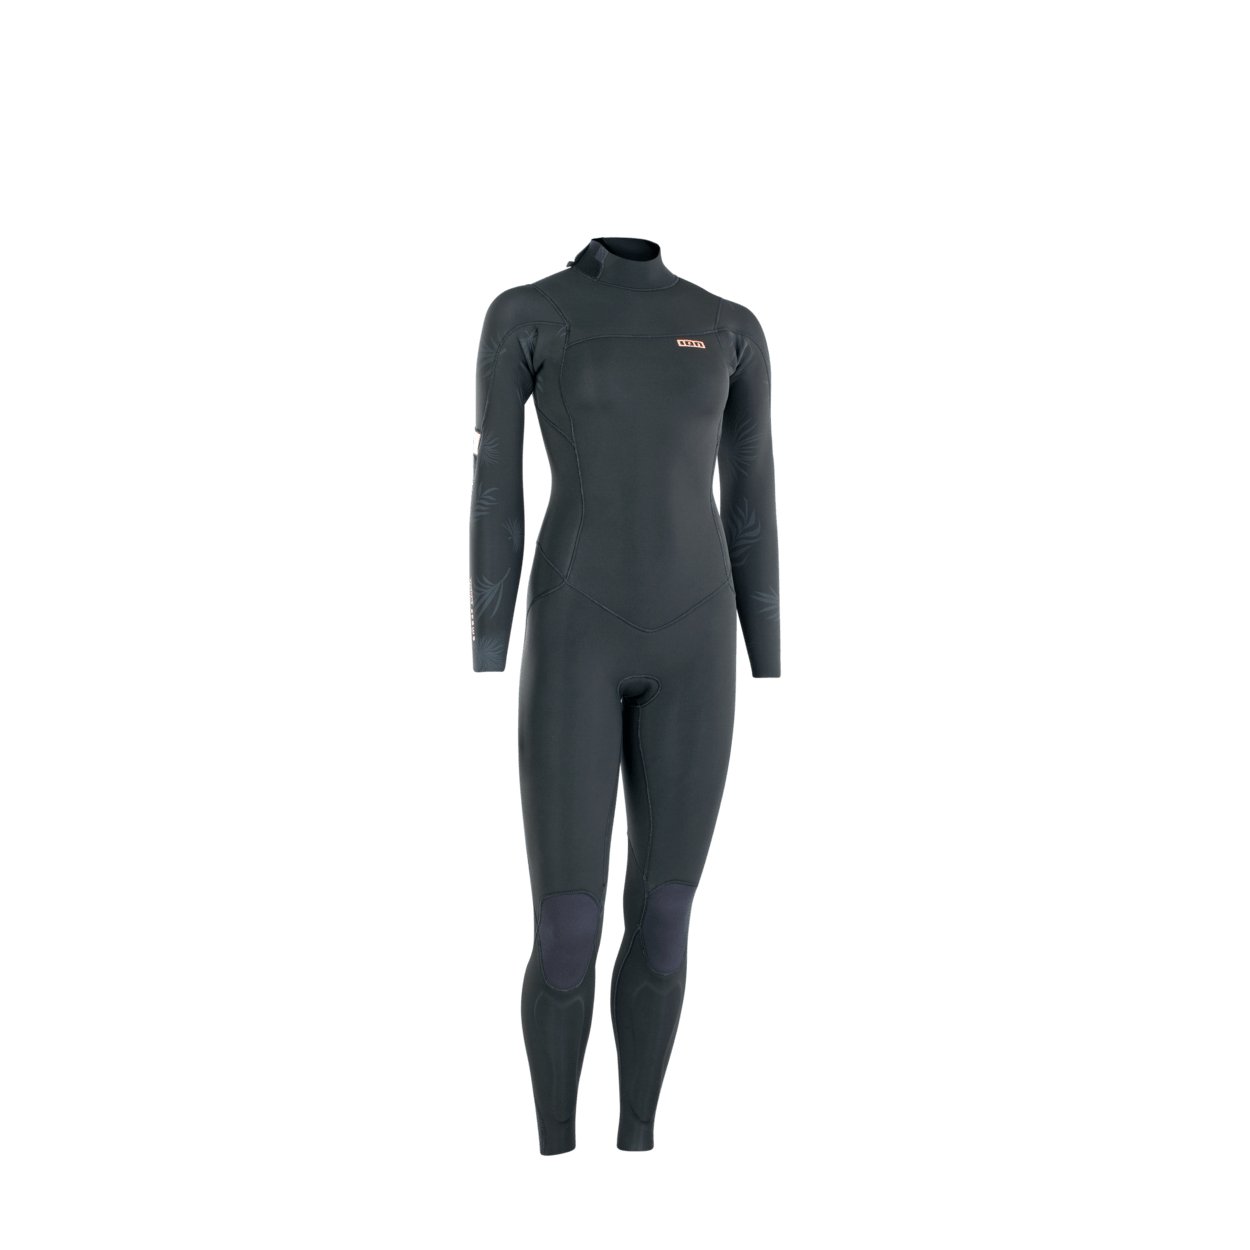 ION Women Wetsuit Amaze Core 5/4 Back Zip 2022 - Worthing Watersports - 9010583057569 - Wetsuits - ION Water